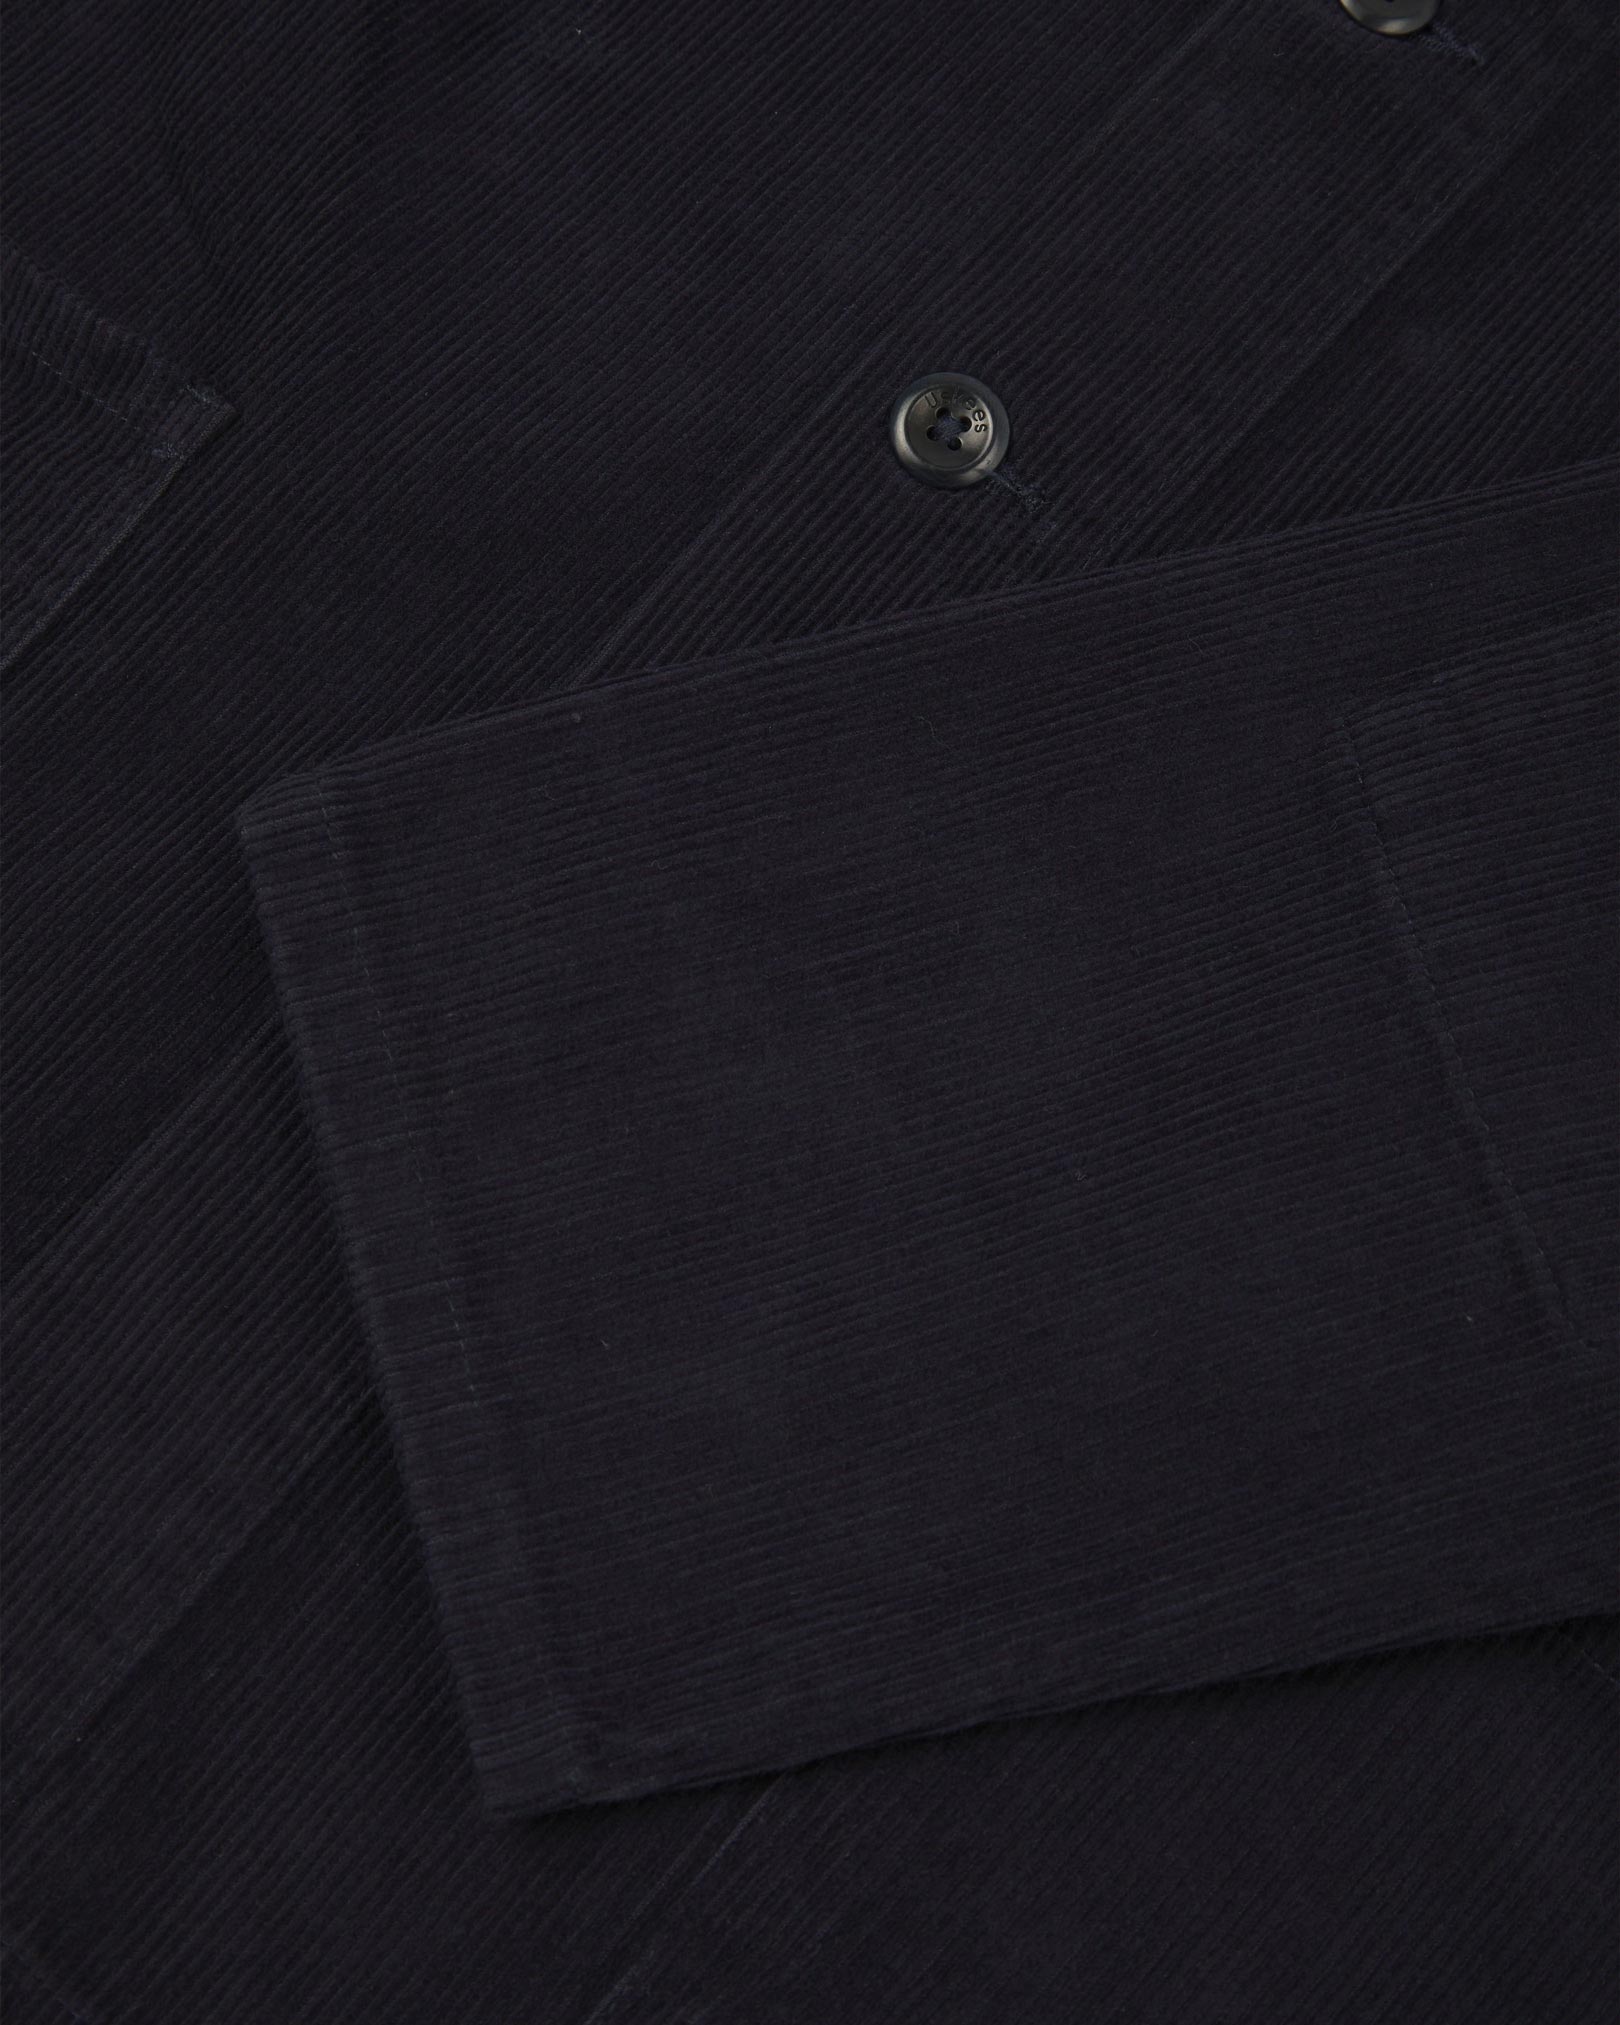 Closer view of mid section of midnight blue, buttoned corduroy overshirt from Uskees. Focus on cuff, pockets, corozo buttons and corduroy texture.